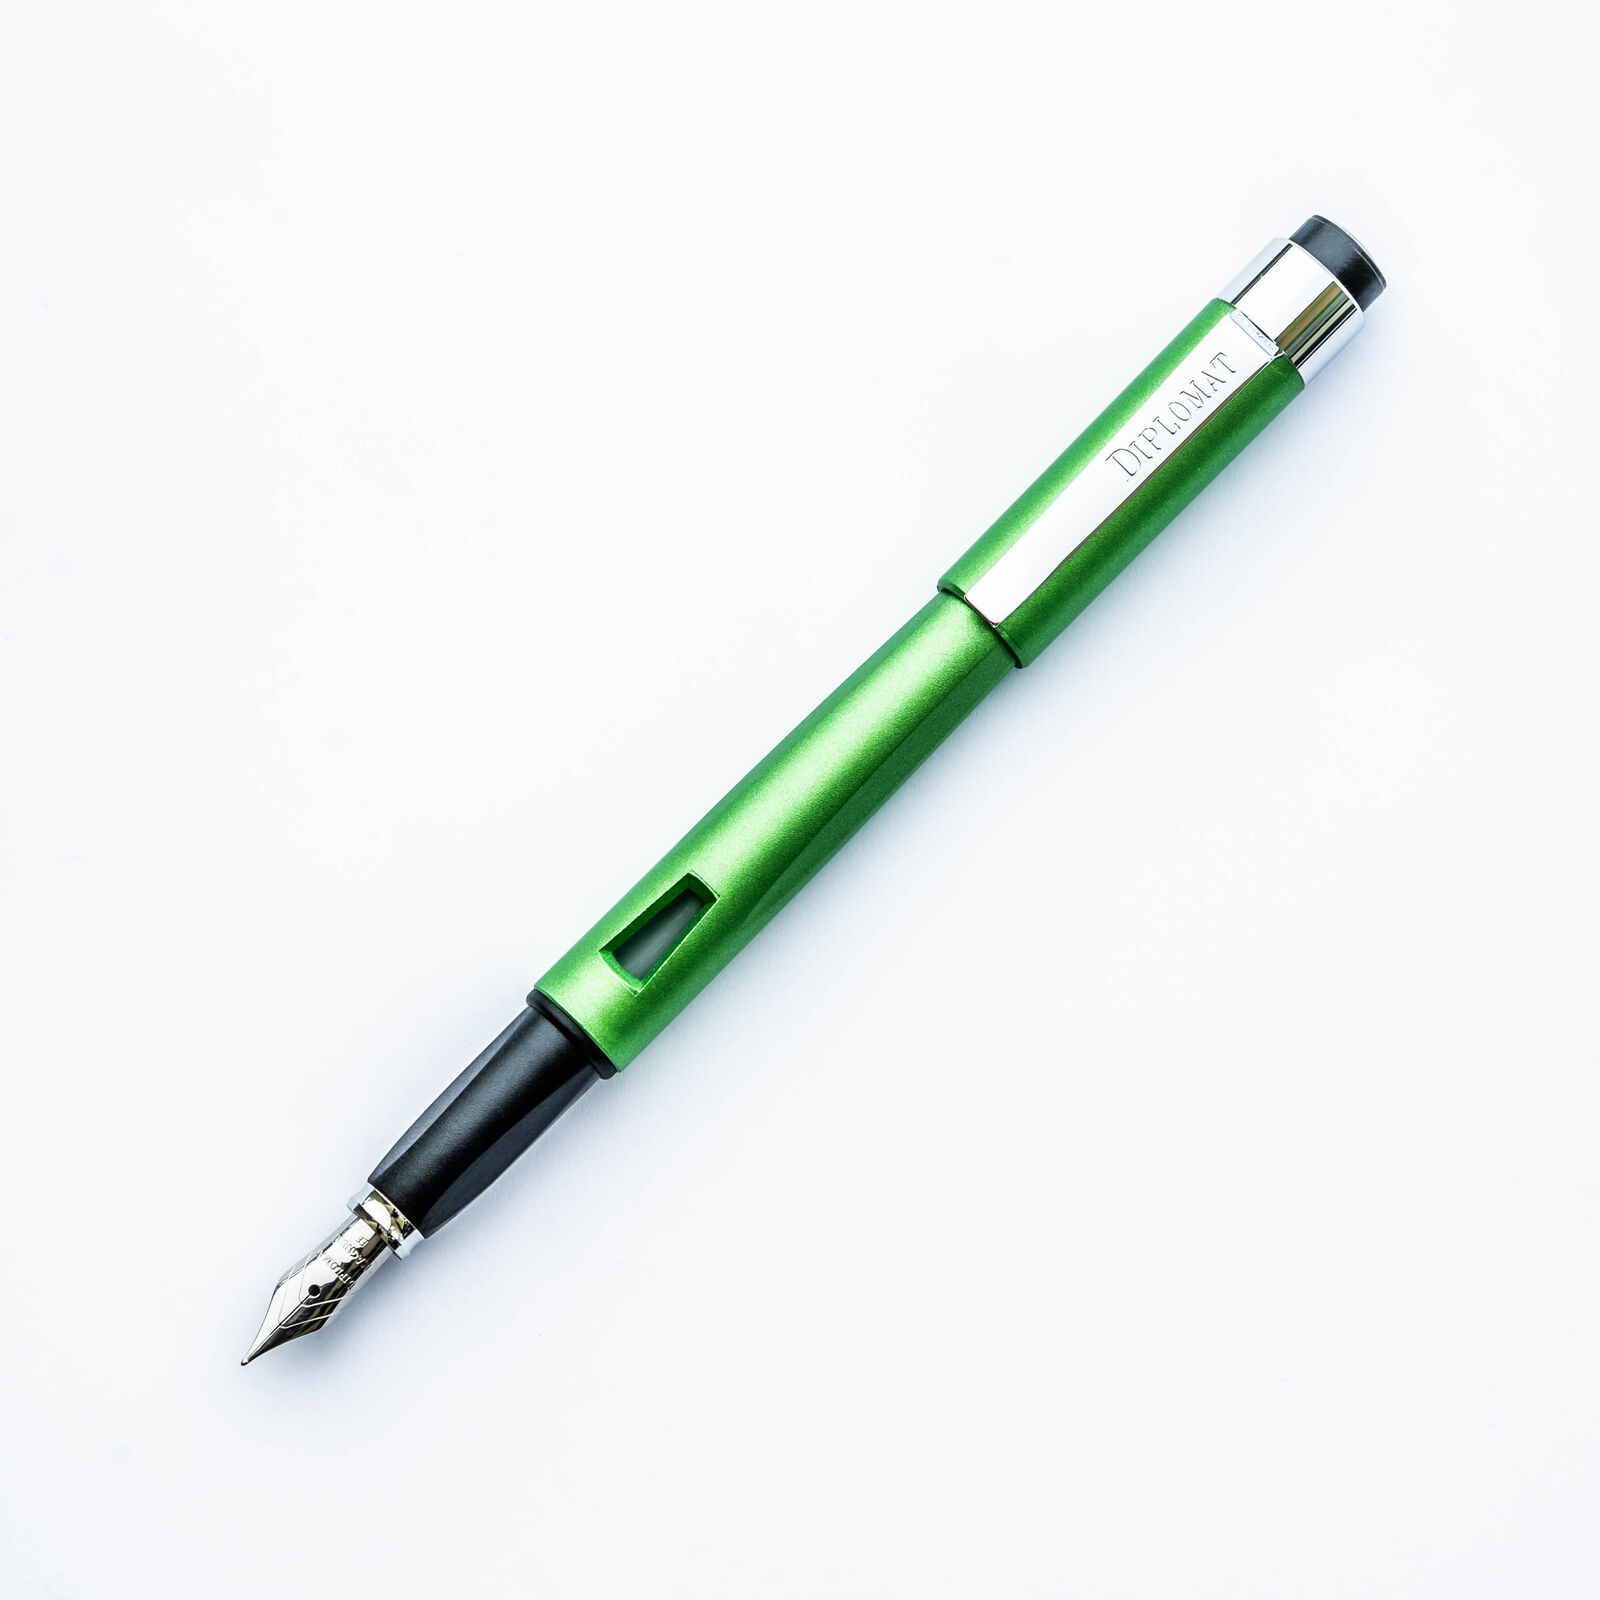 Diplomat Magnum Soft Touch Fountain Pen in Lime Green - Fine Point - NEW in box